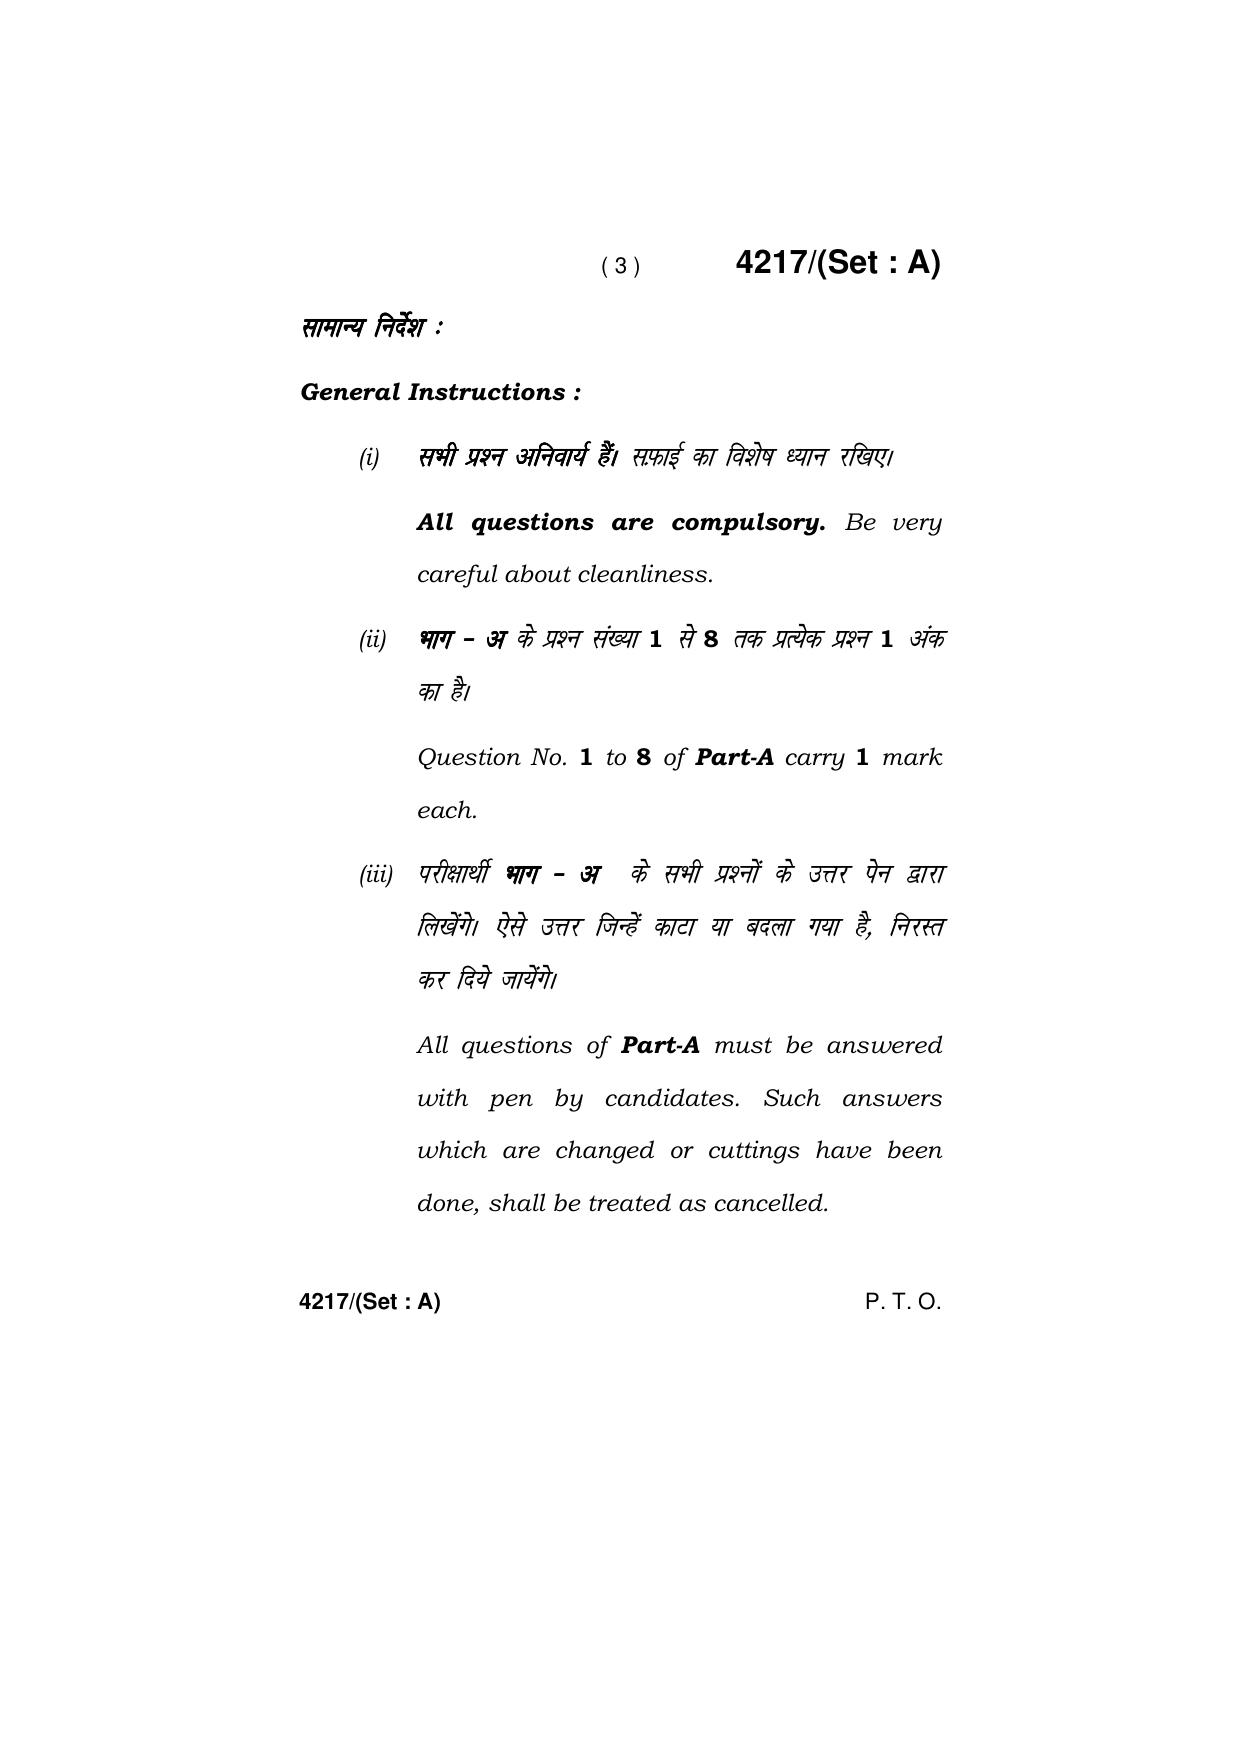 Haryana Board HBSE Class 10 Drawing (All Set) 2019 Question Paper - Page 3